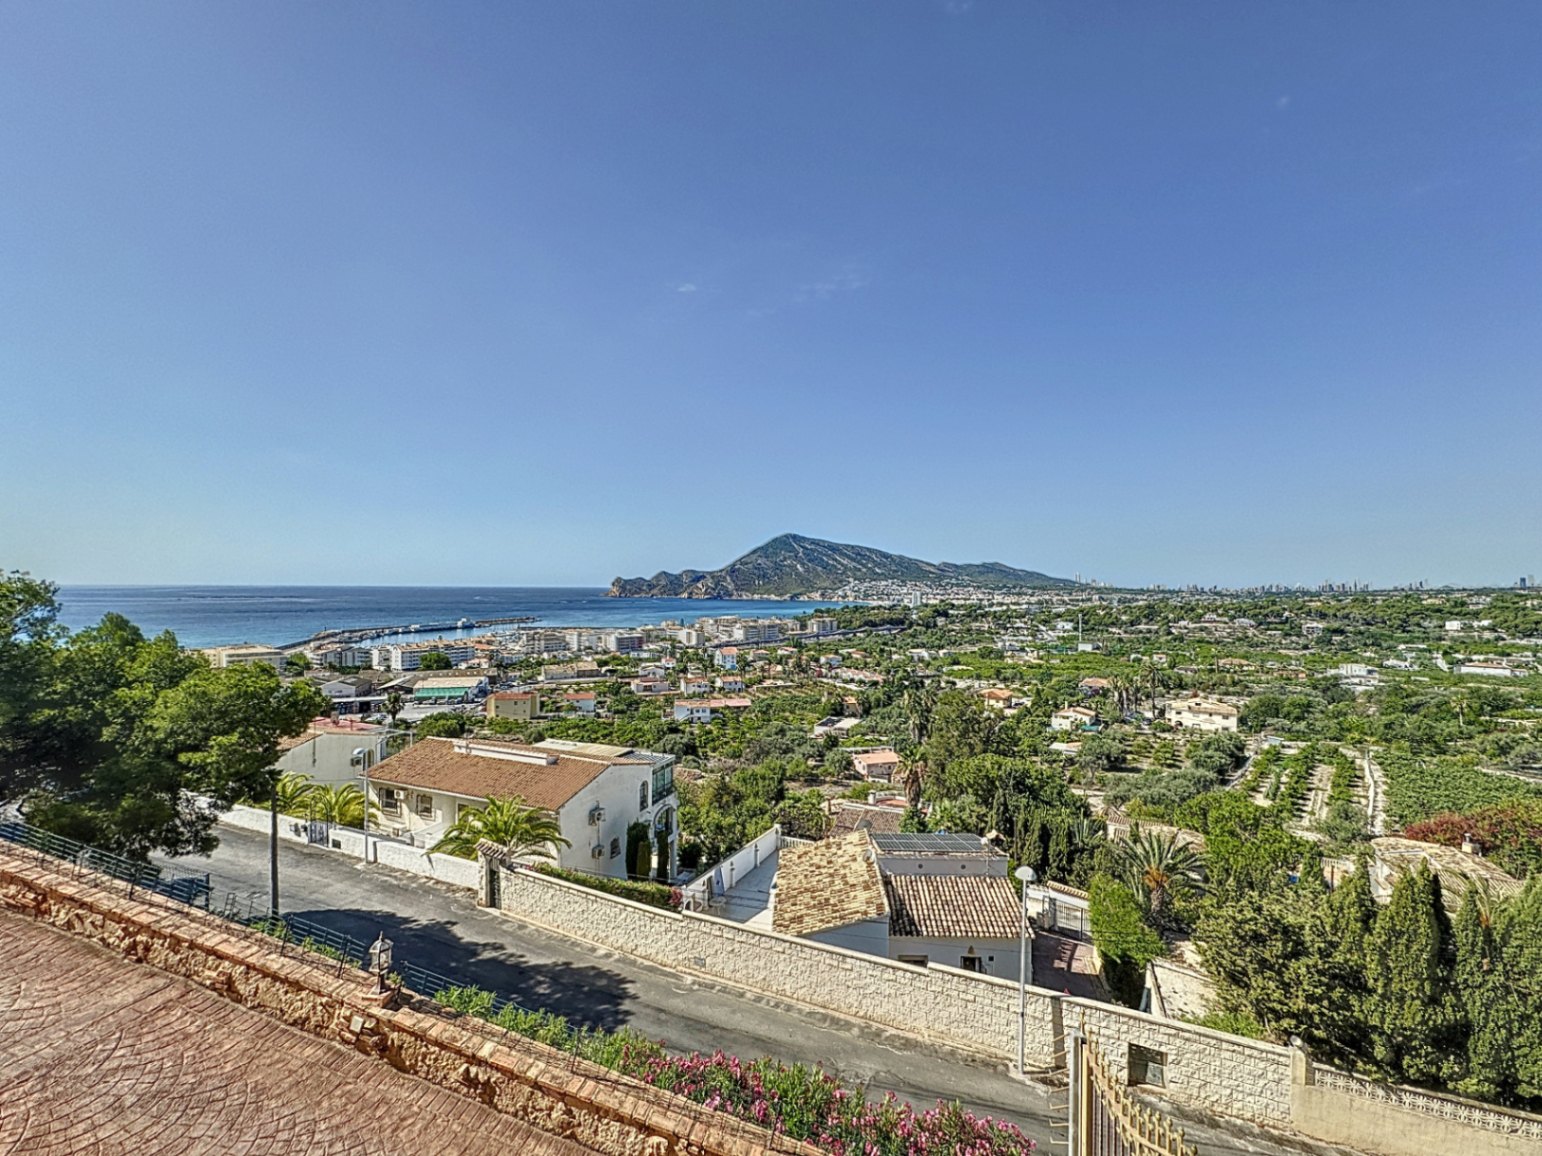 SPECTACULAR VILLA FOR SALE NEAR THE OLD TOWN OF ALTEA